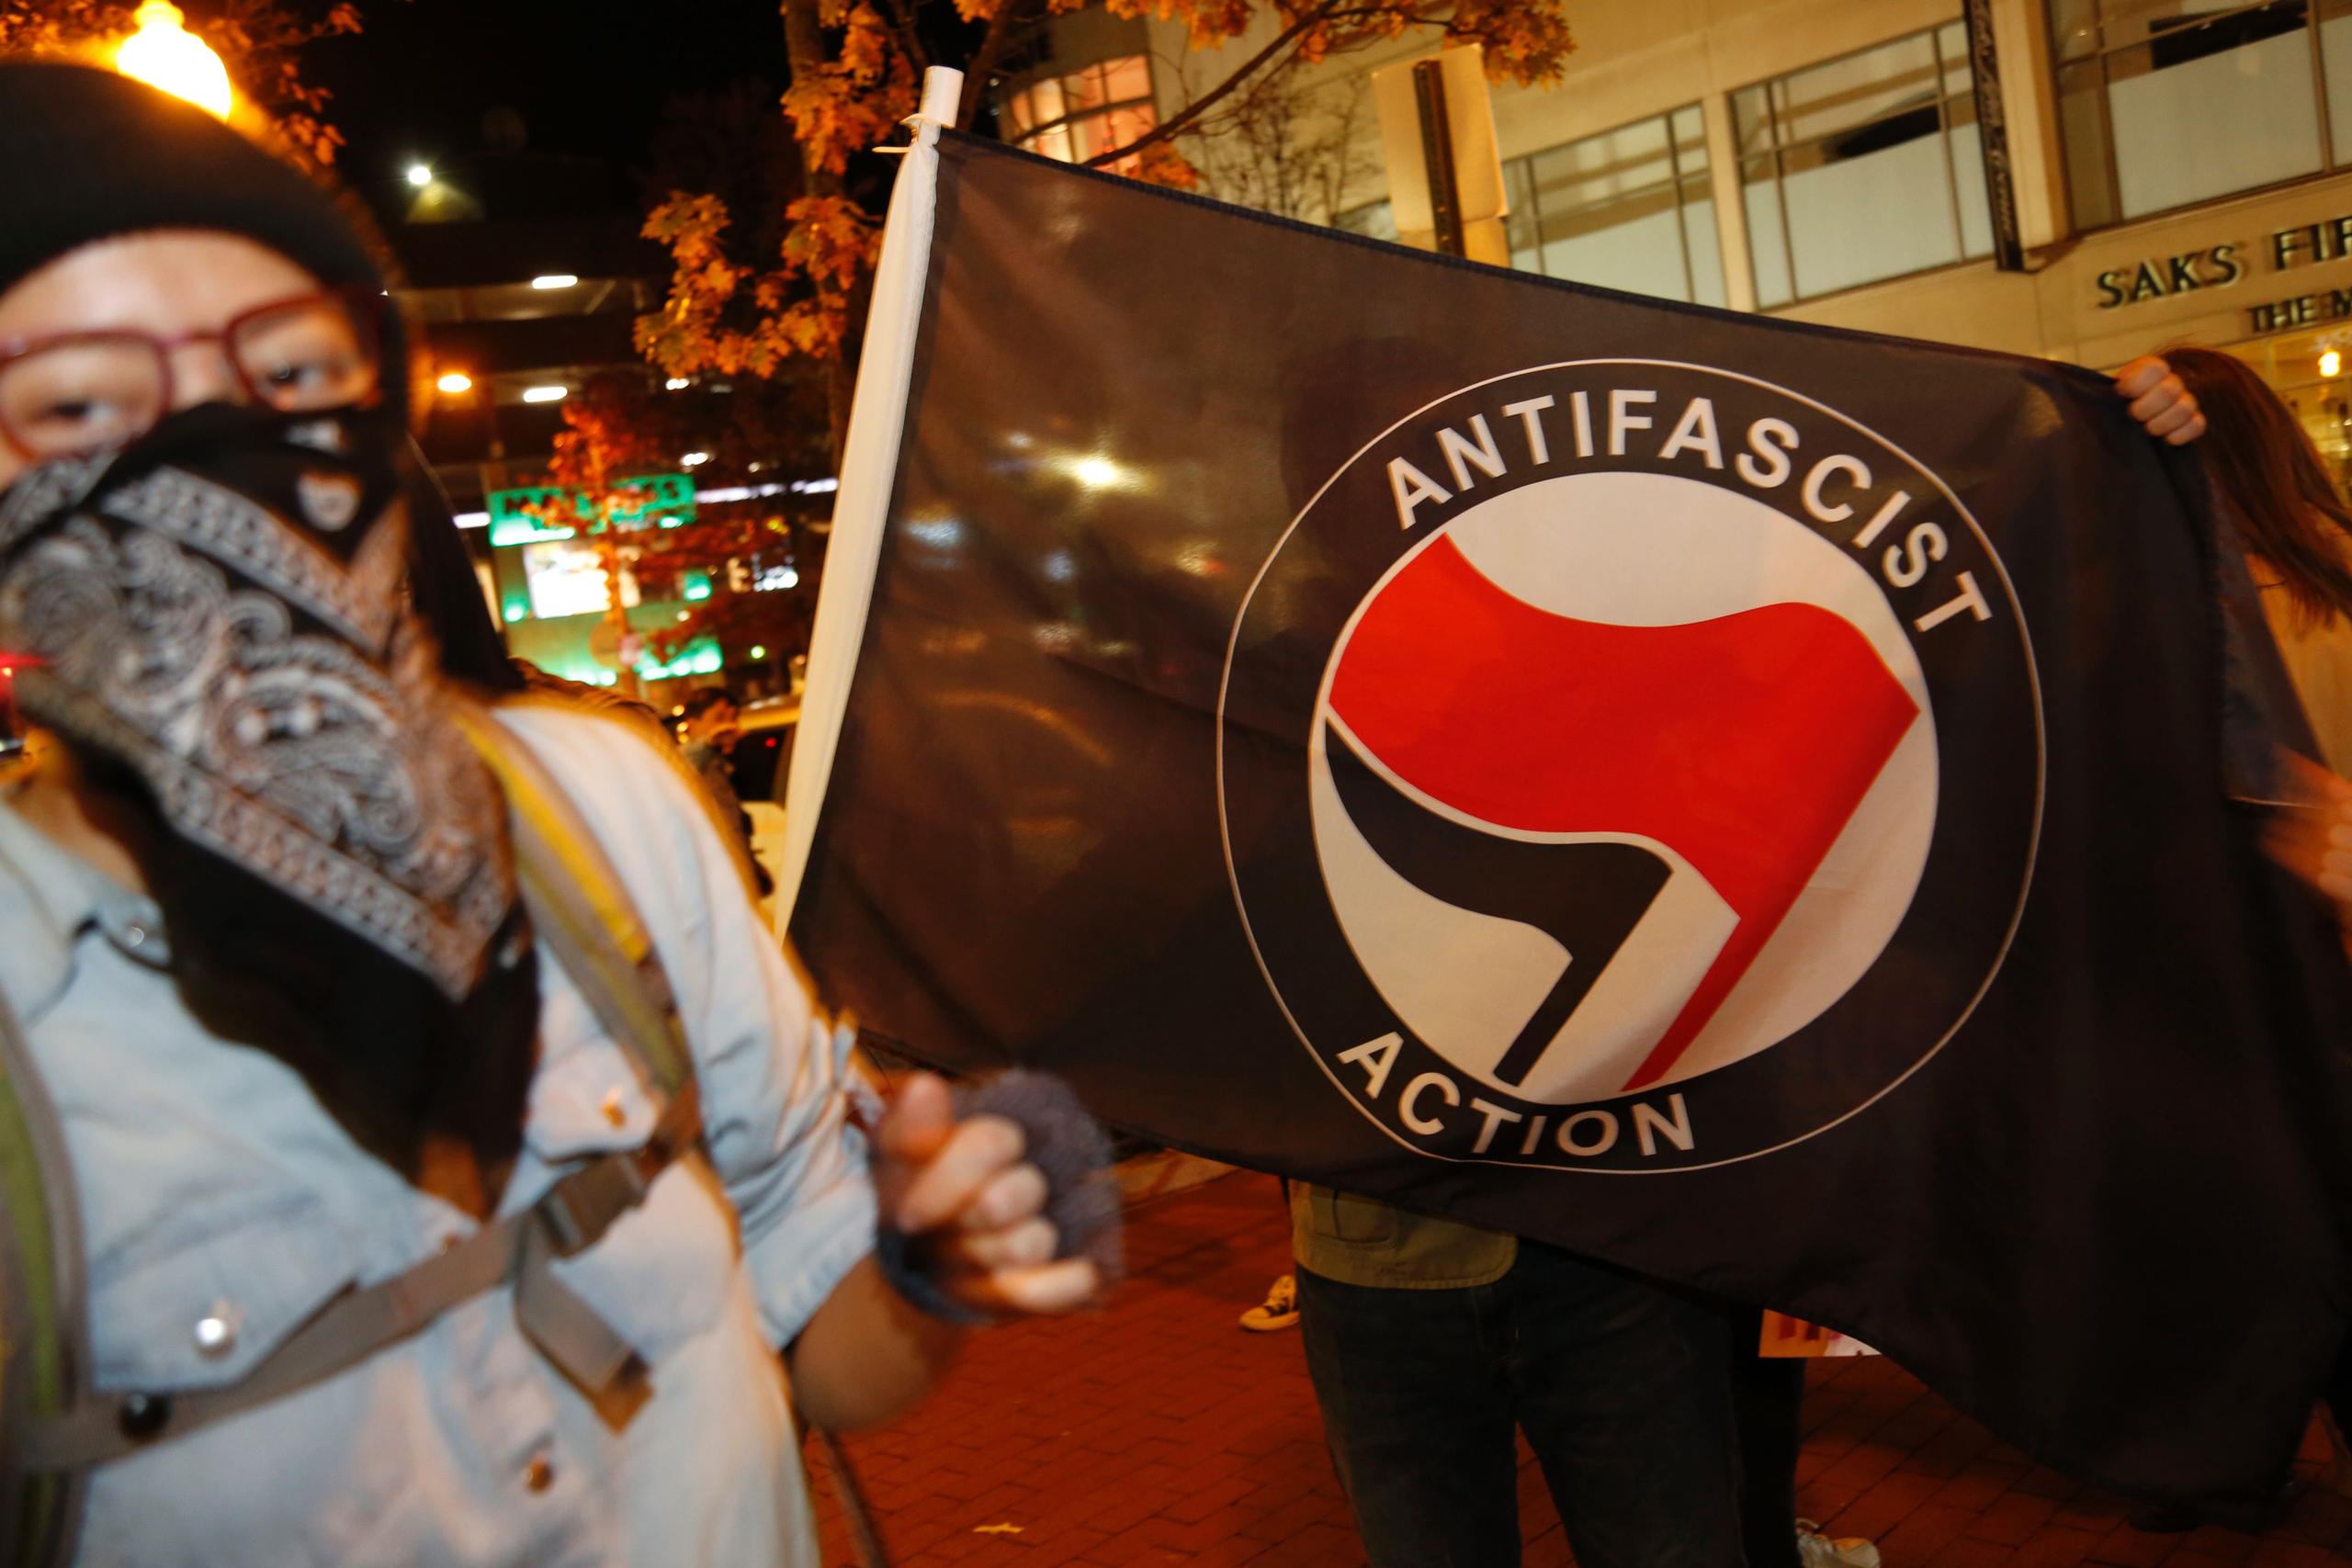 Members of D.C. Antifascist Coalition protest in opposition to a conference by the National Policy Institute in front of the Magliano's restaurant in Washington, D.C., on Nov. 18, 2016 (Andrew Biraj—AFP/Getty Images)